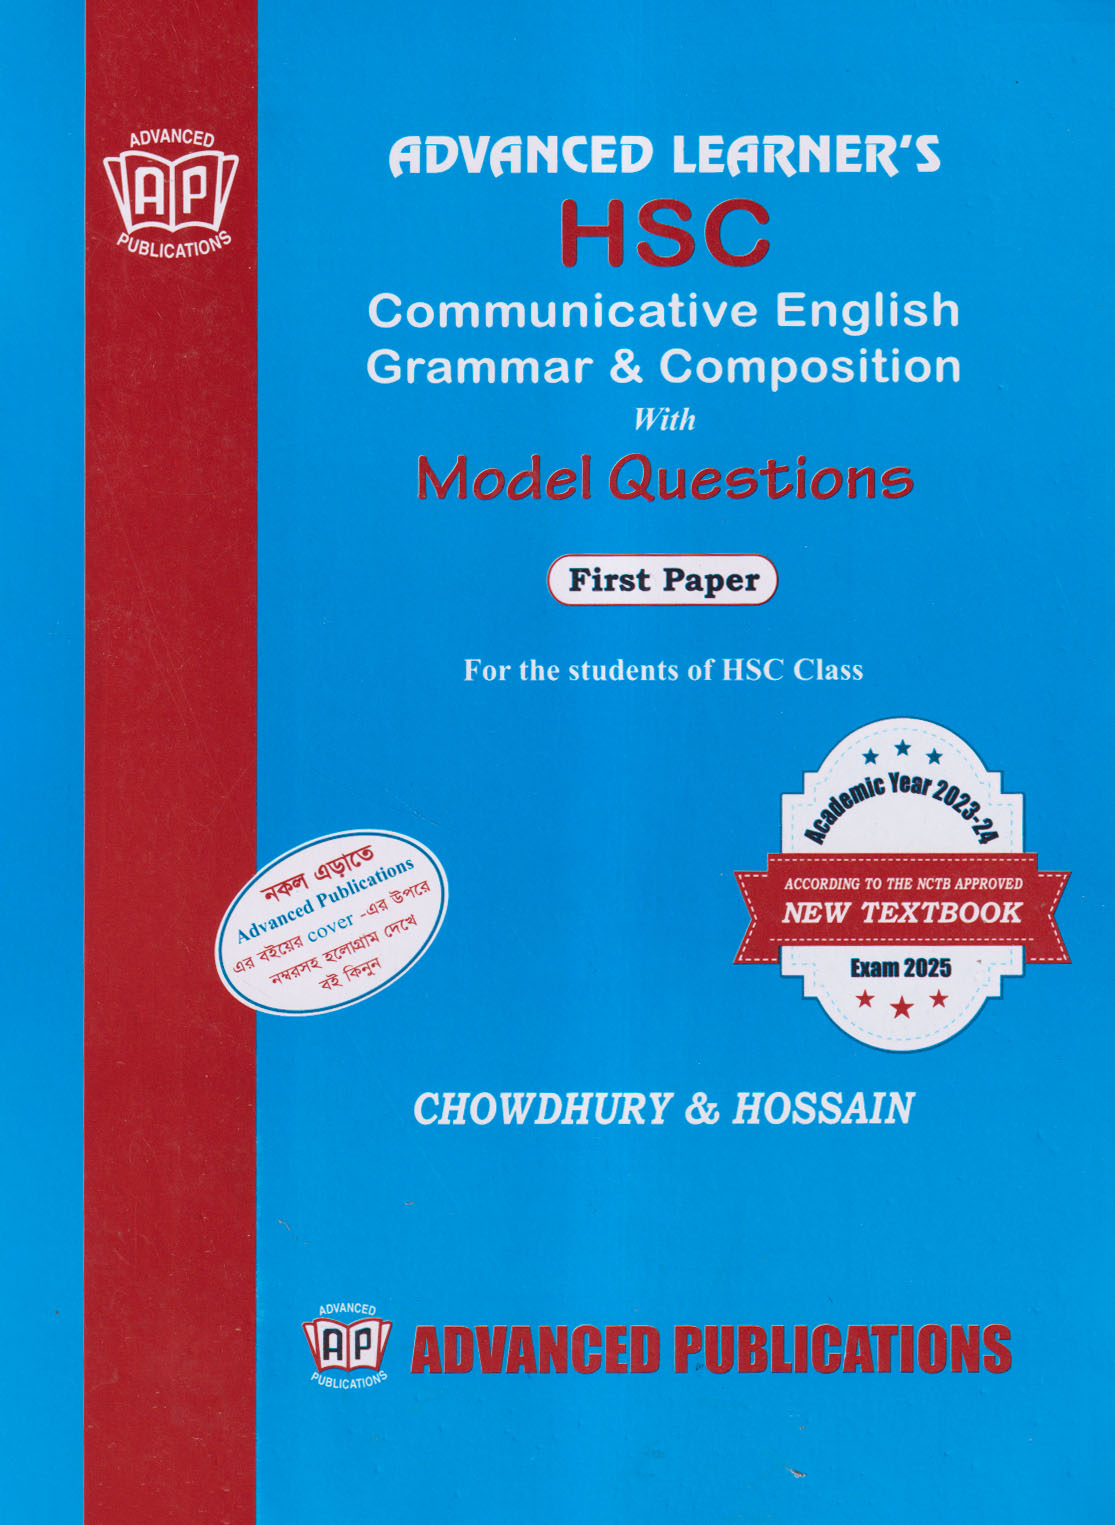 Advanced Learners HSC Communicative English Grammar & Composition With Model Questions First Paper (পেপারব্যাক)